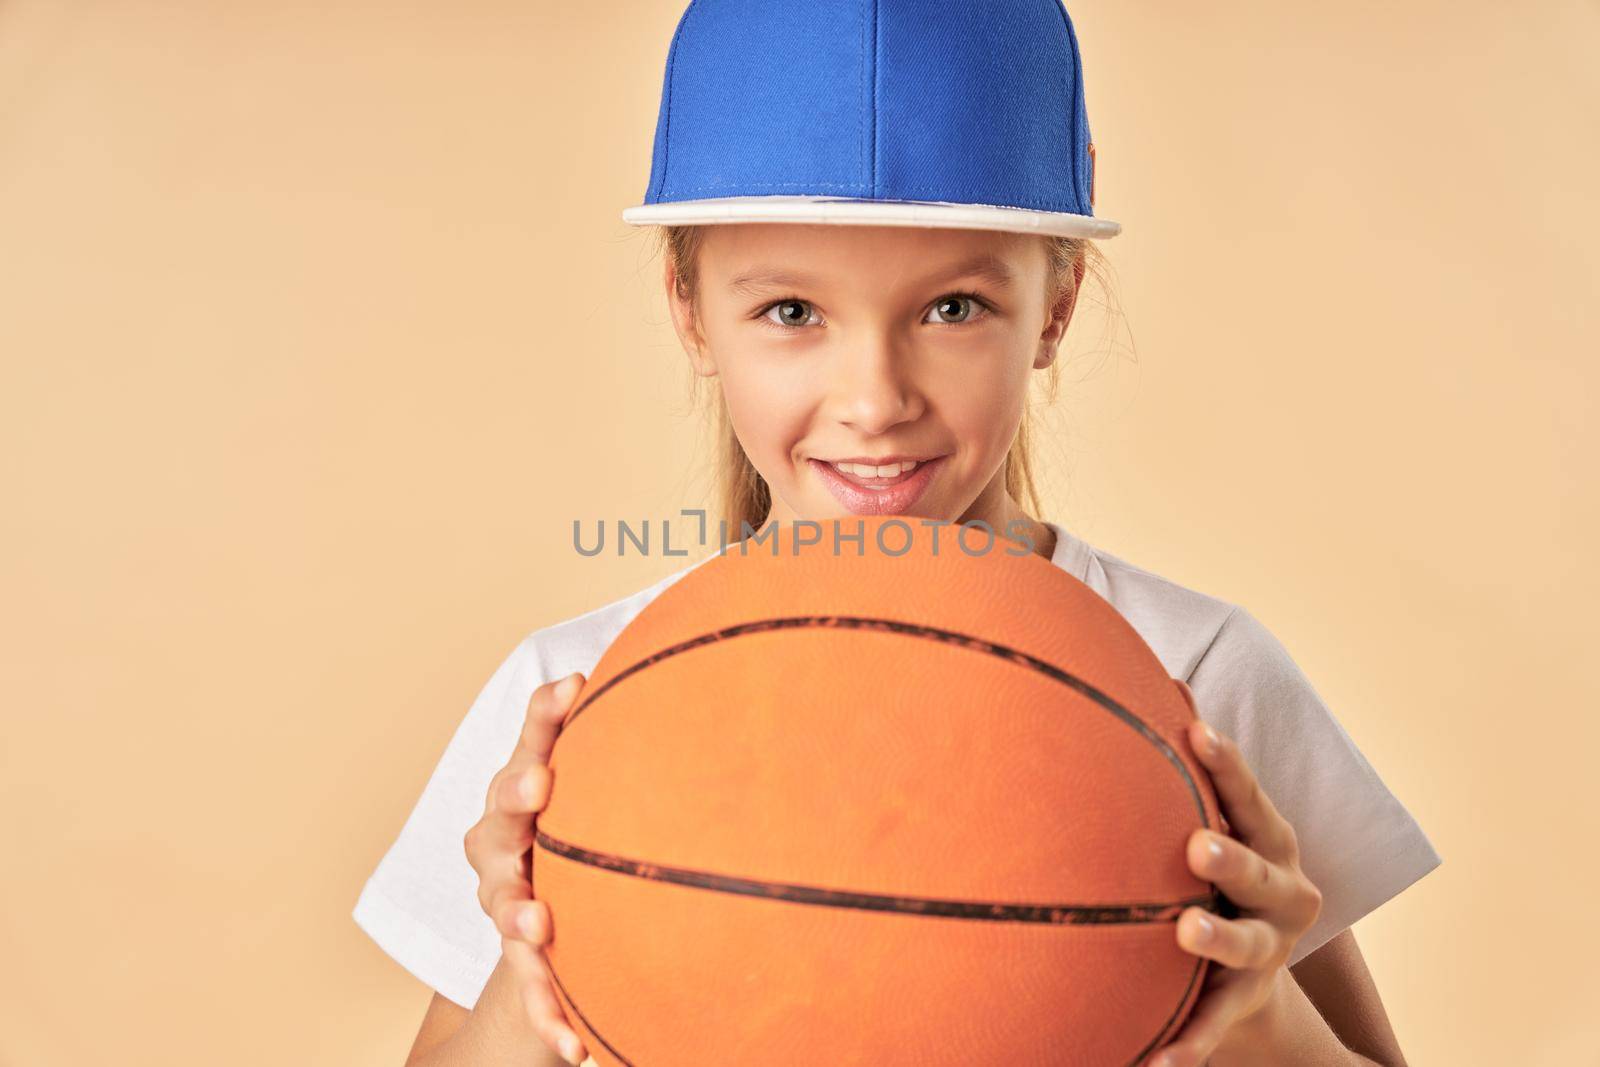 Cheerful female child basketball player holding game ball and smiling while standing against light orange background